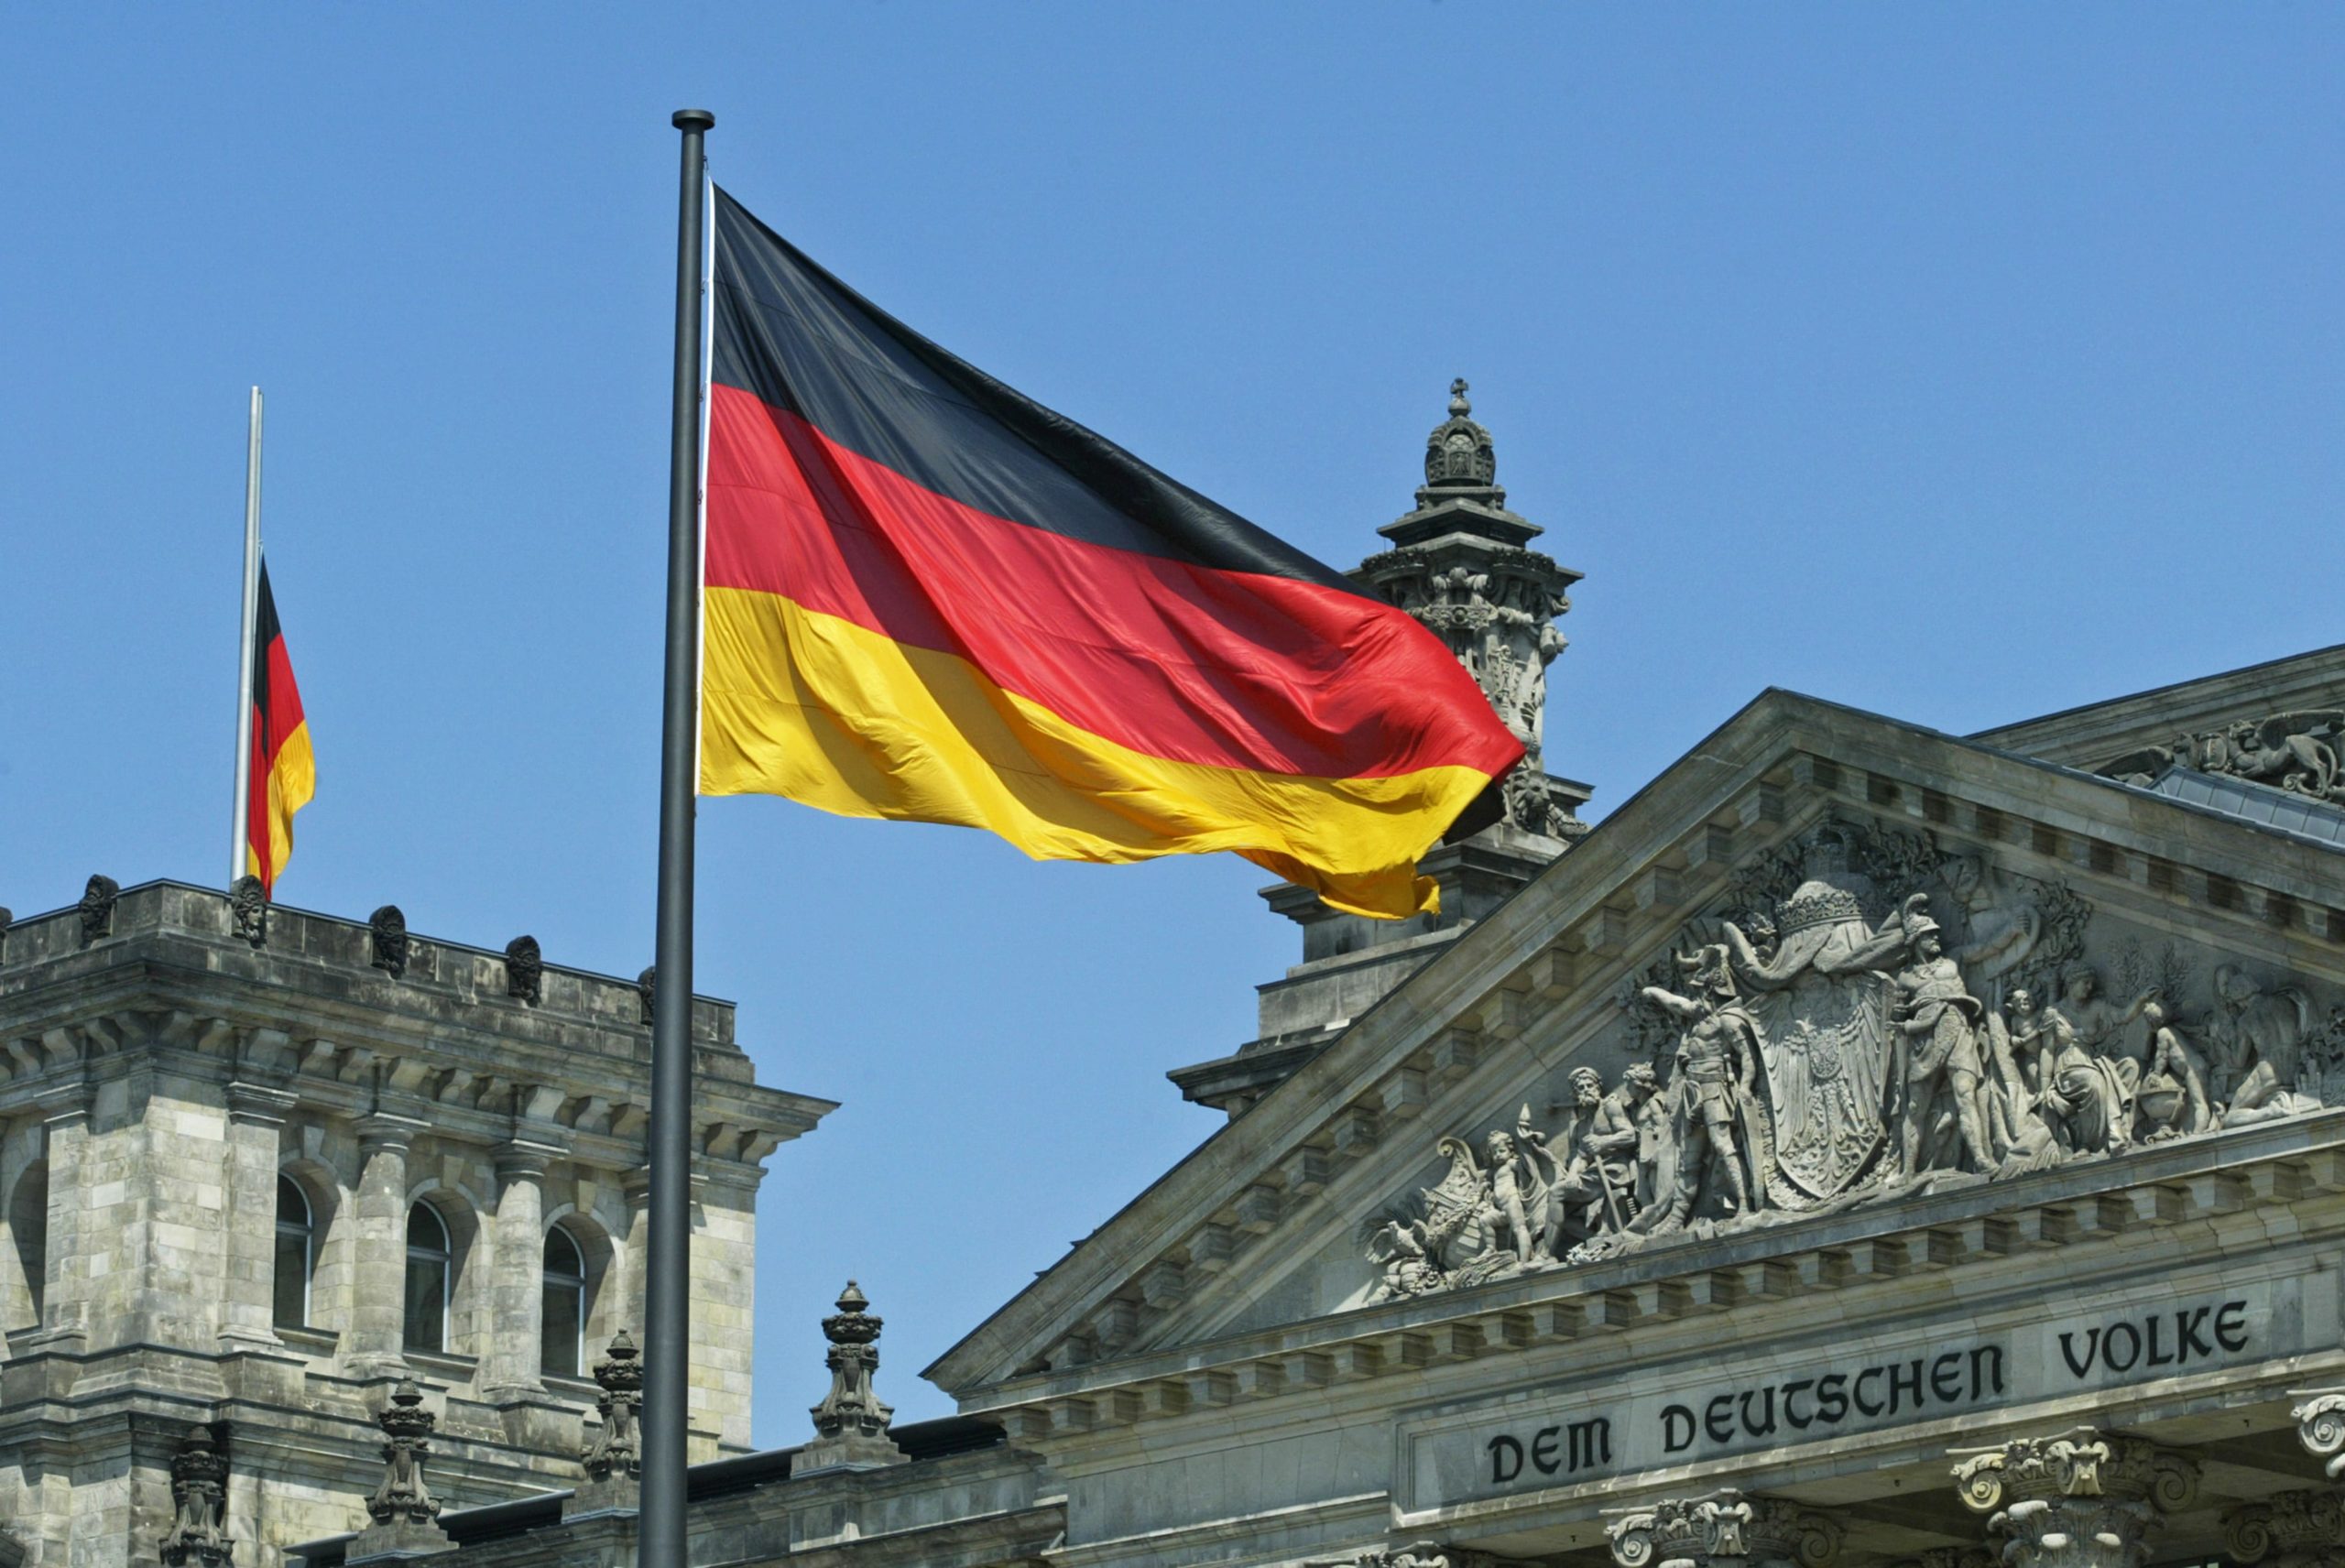 It's Official: New Ruling German Coalition to Legalize Recreational Cannabis Use